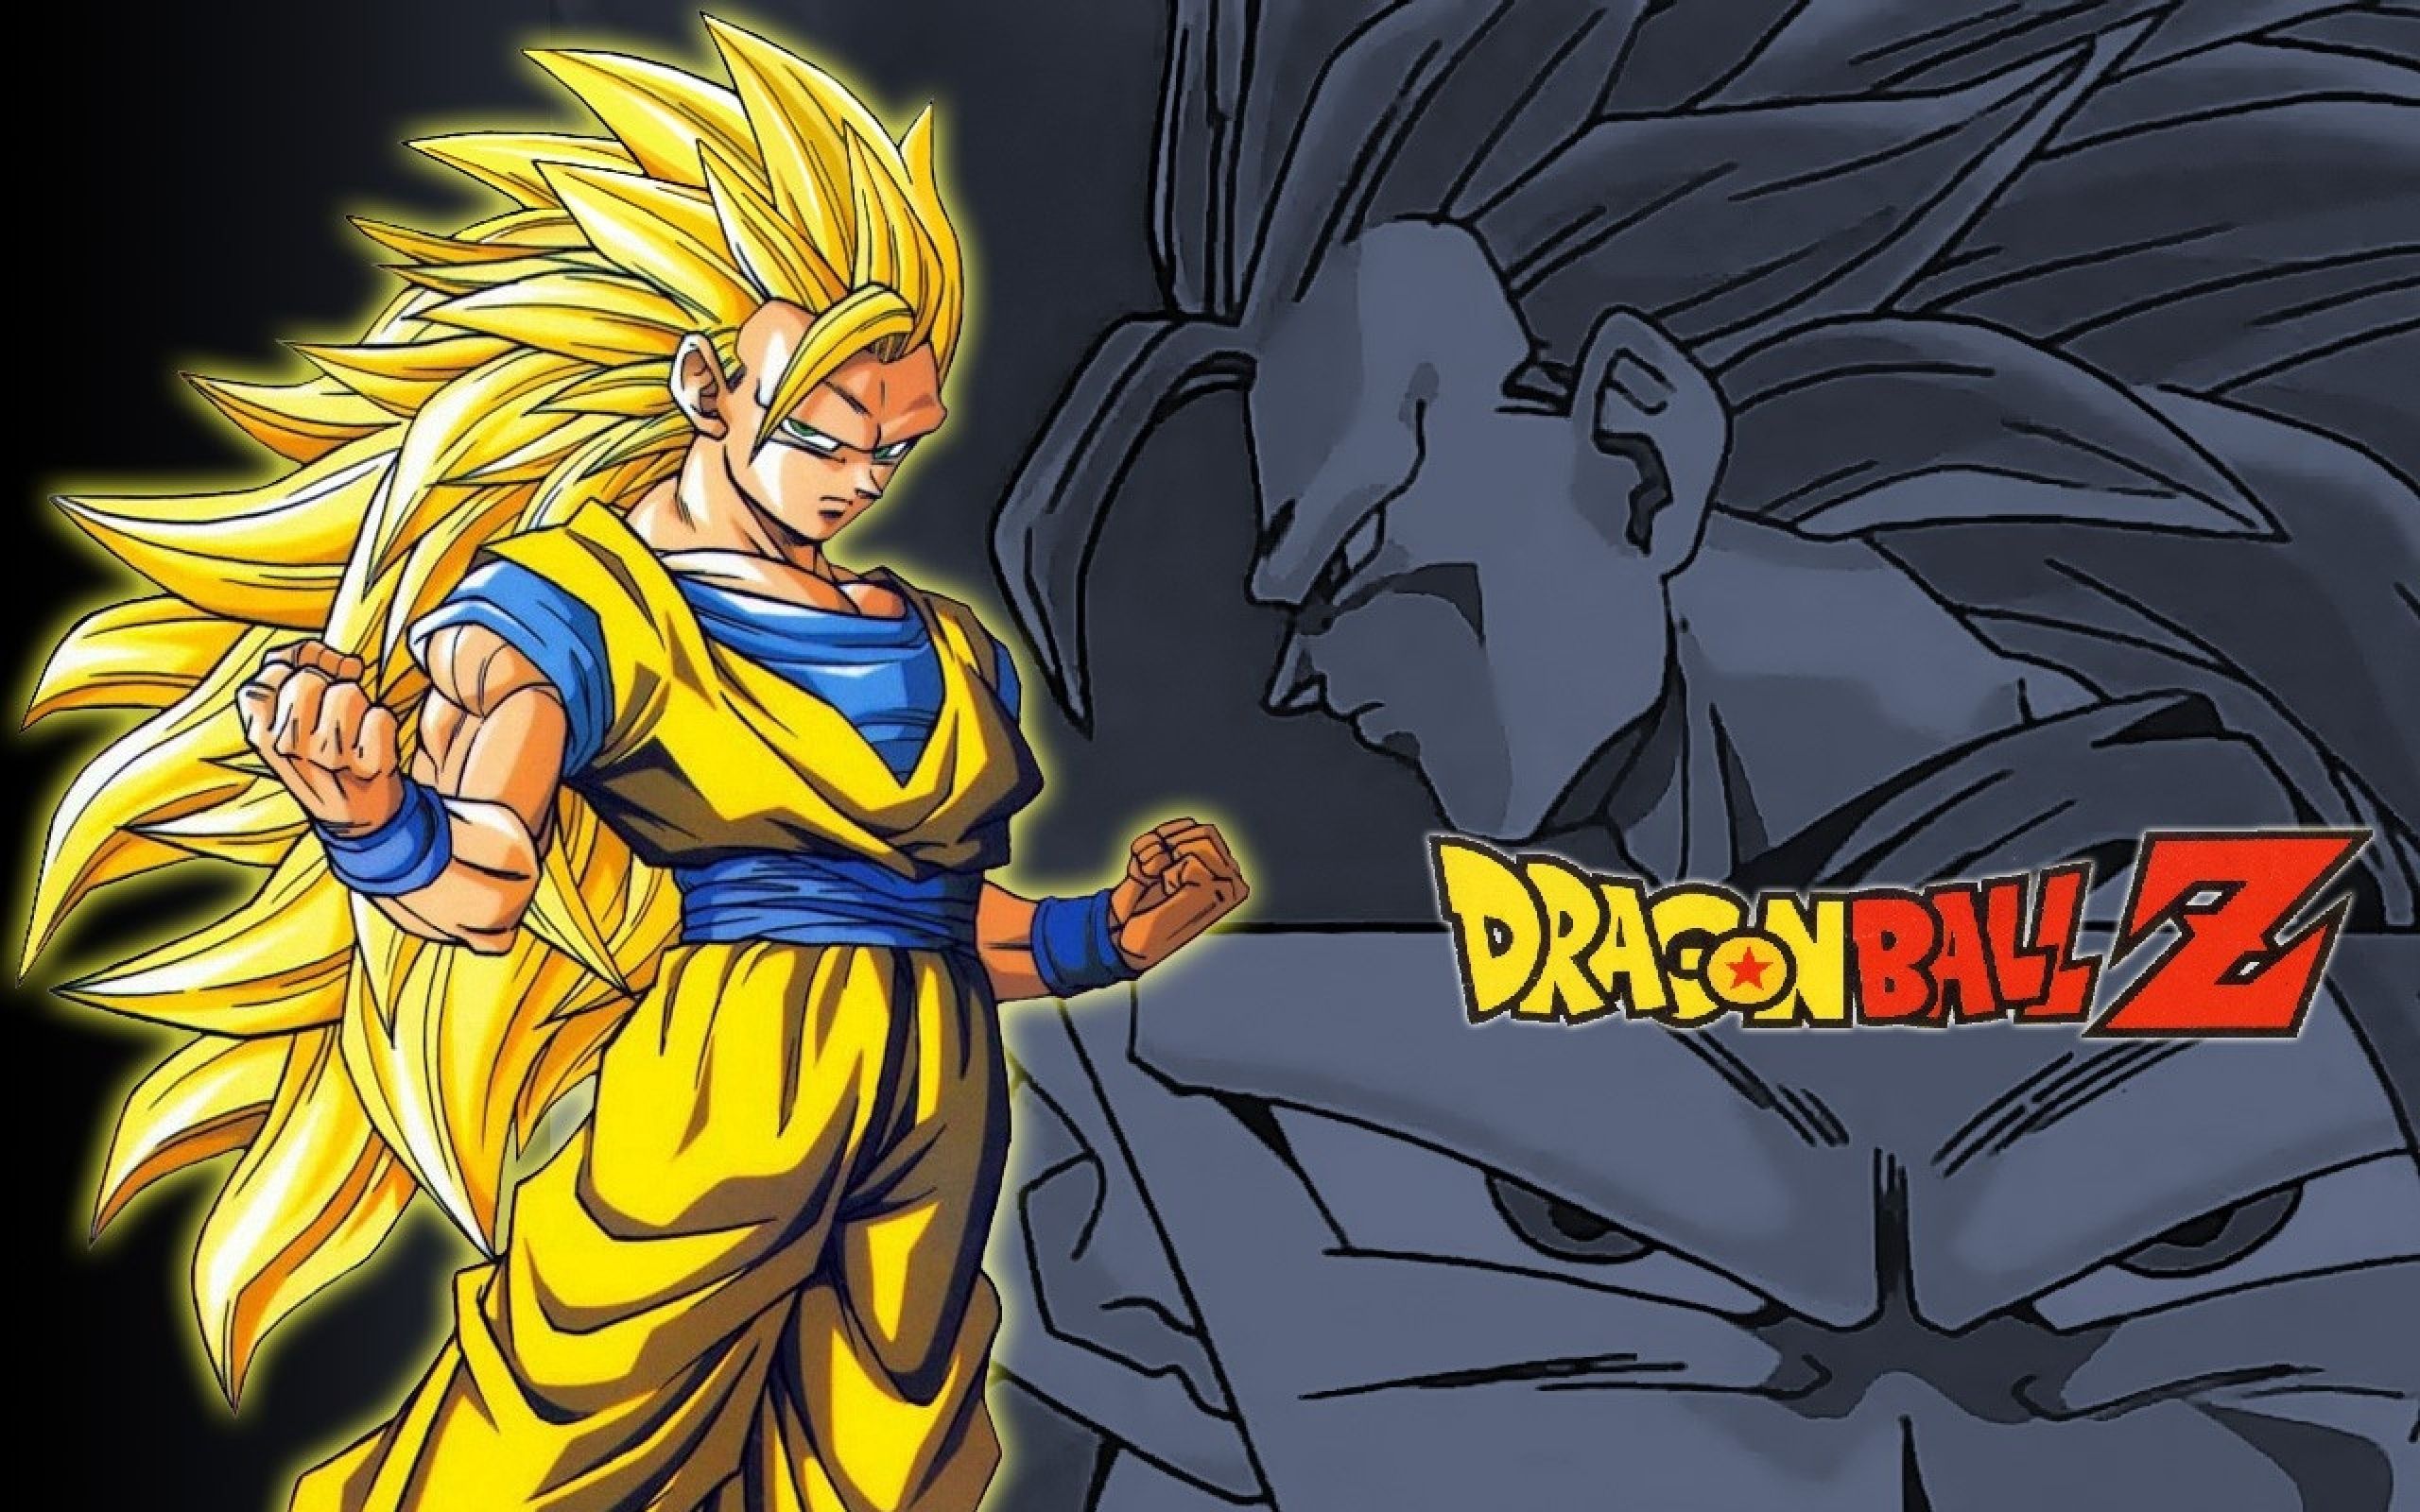 Dragon Ball Z Wallpaper All Characters In High Resolution Hd